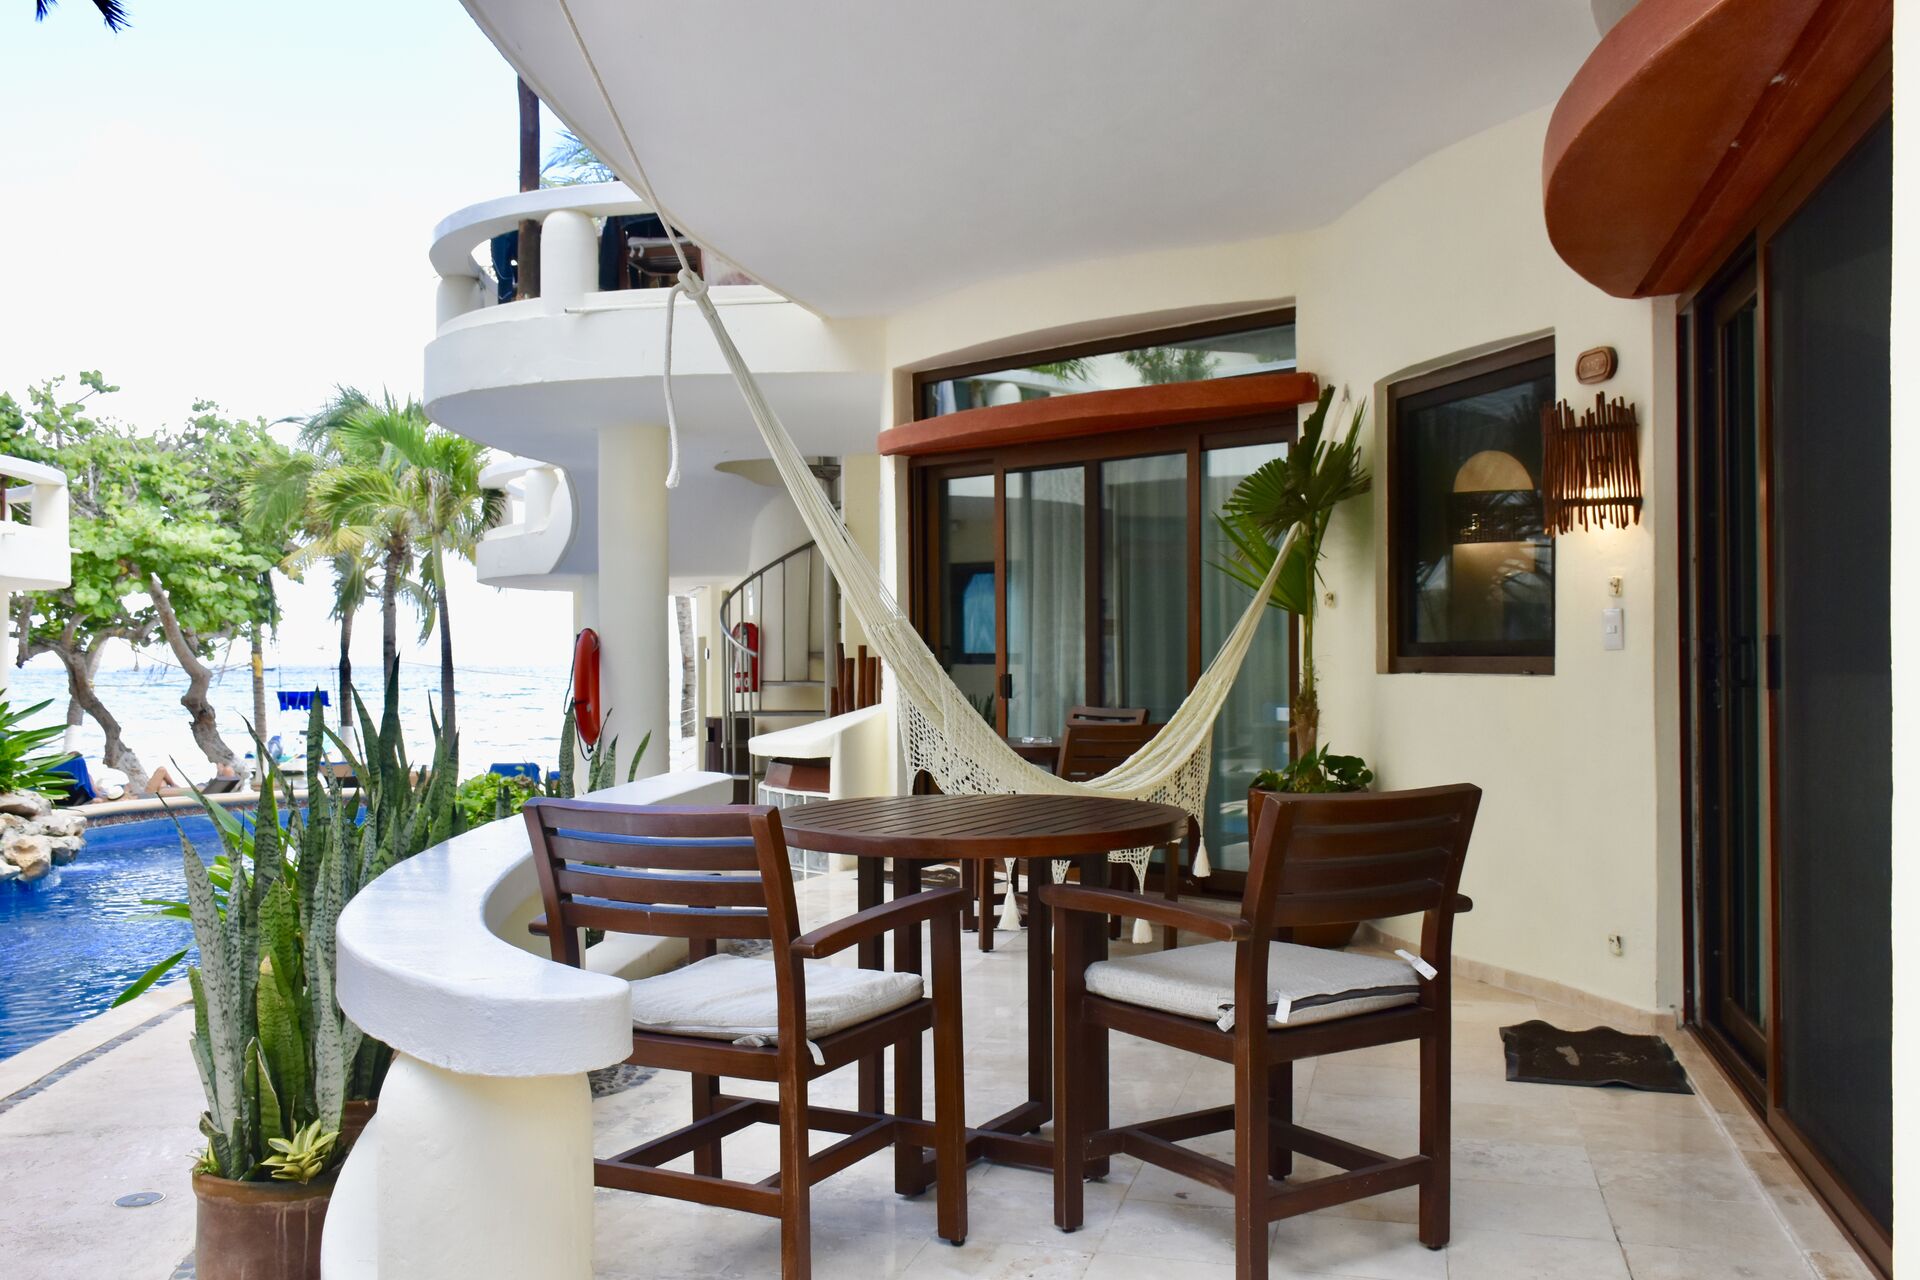 Ocean view balcony with chairs and hammock.